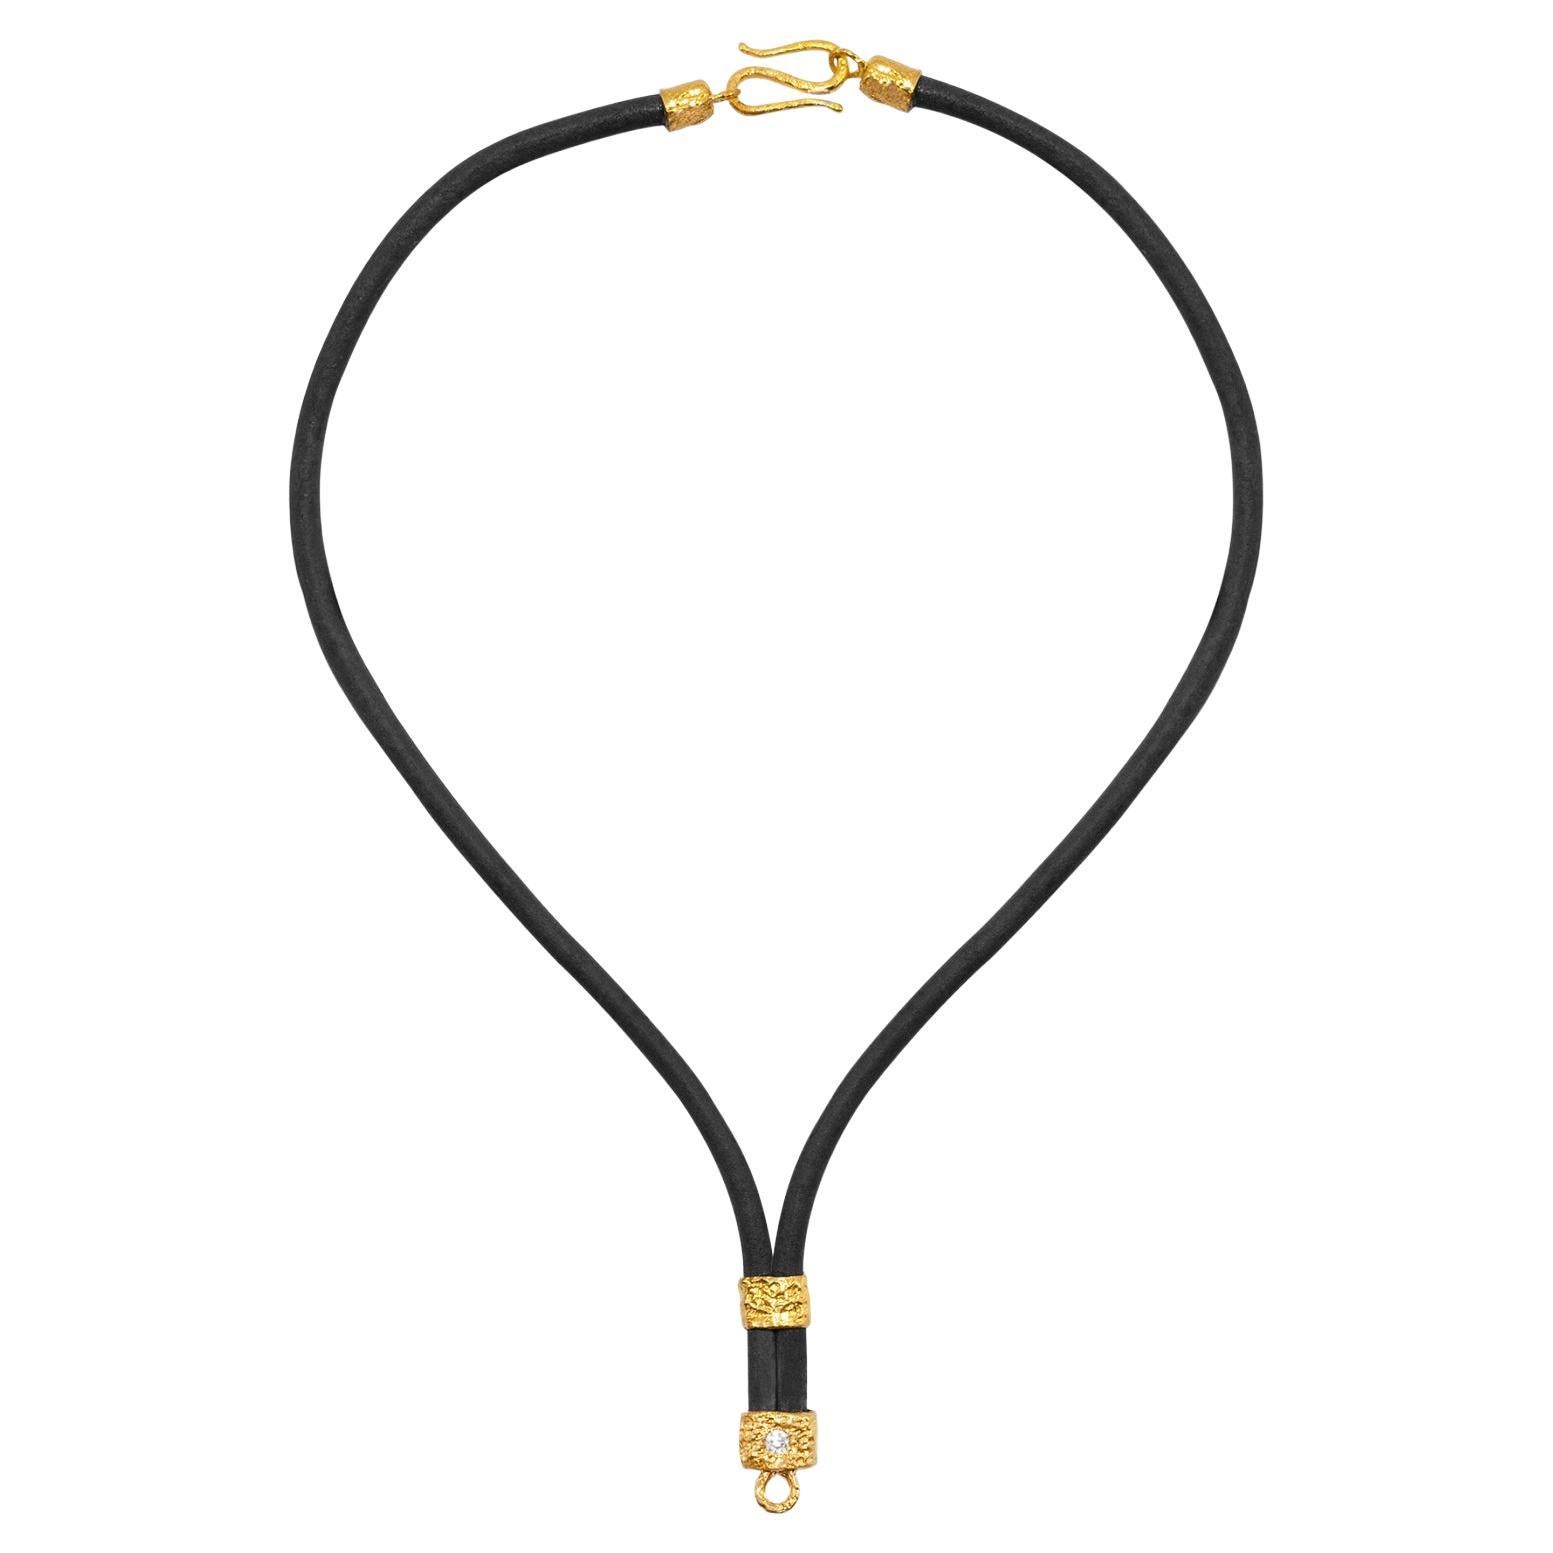 Allegra Leather and 22k Gold Necklace in Black, by Tagili For Sale